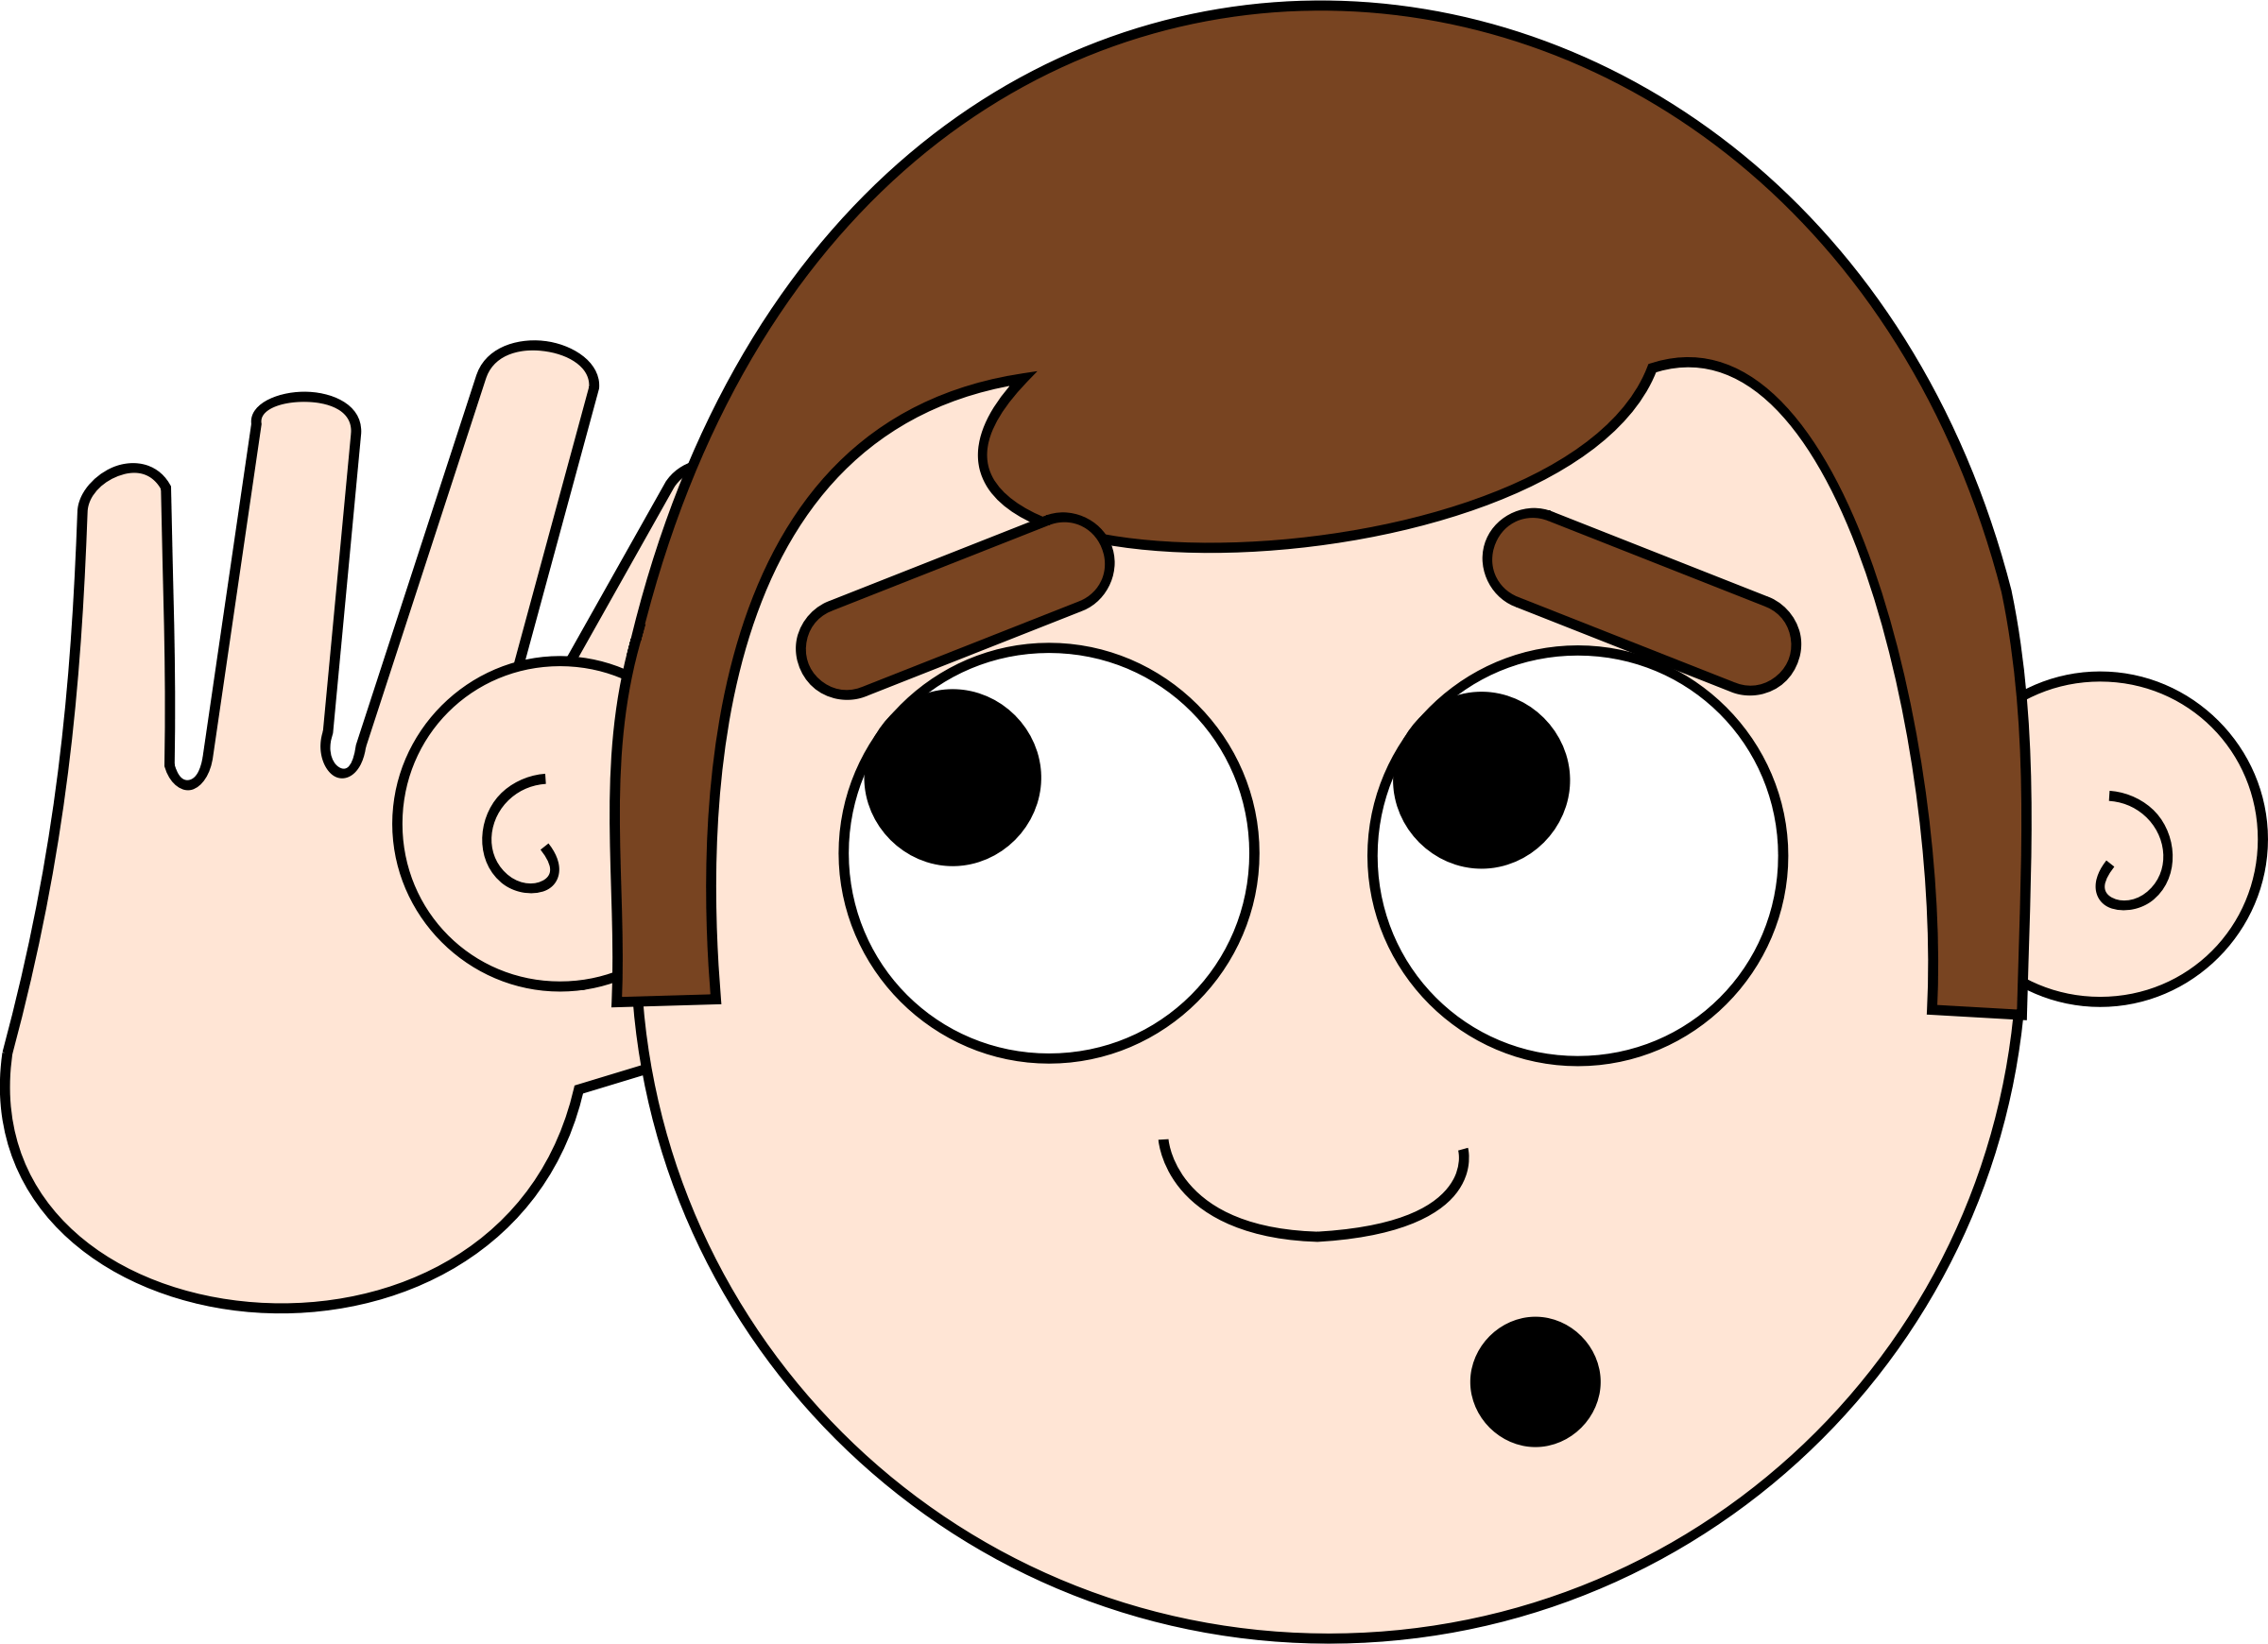 nose clipart uses human